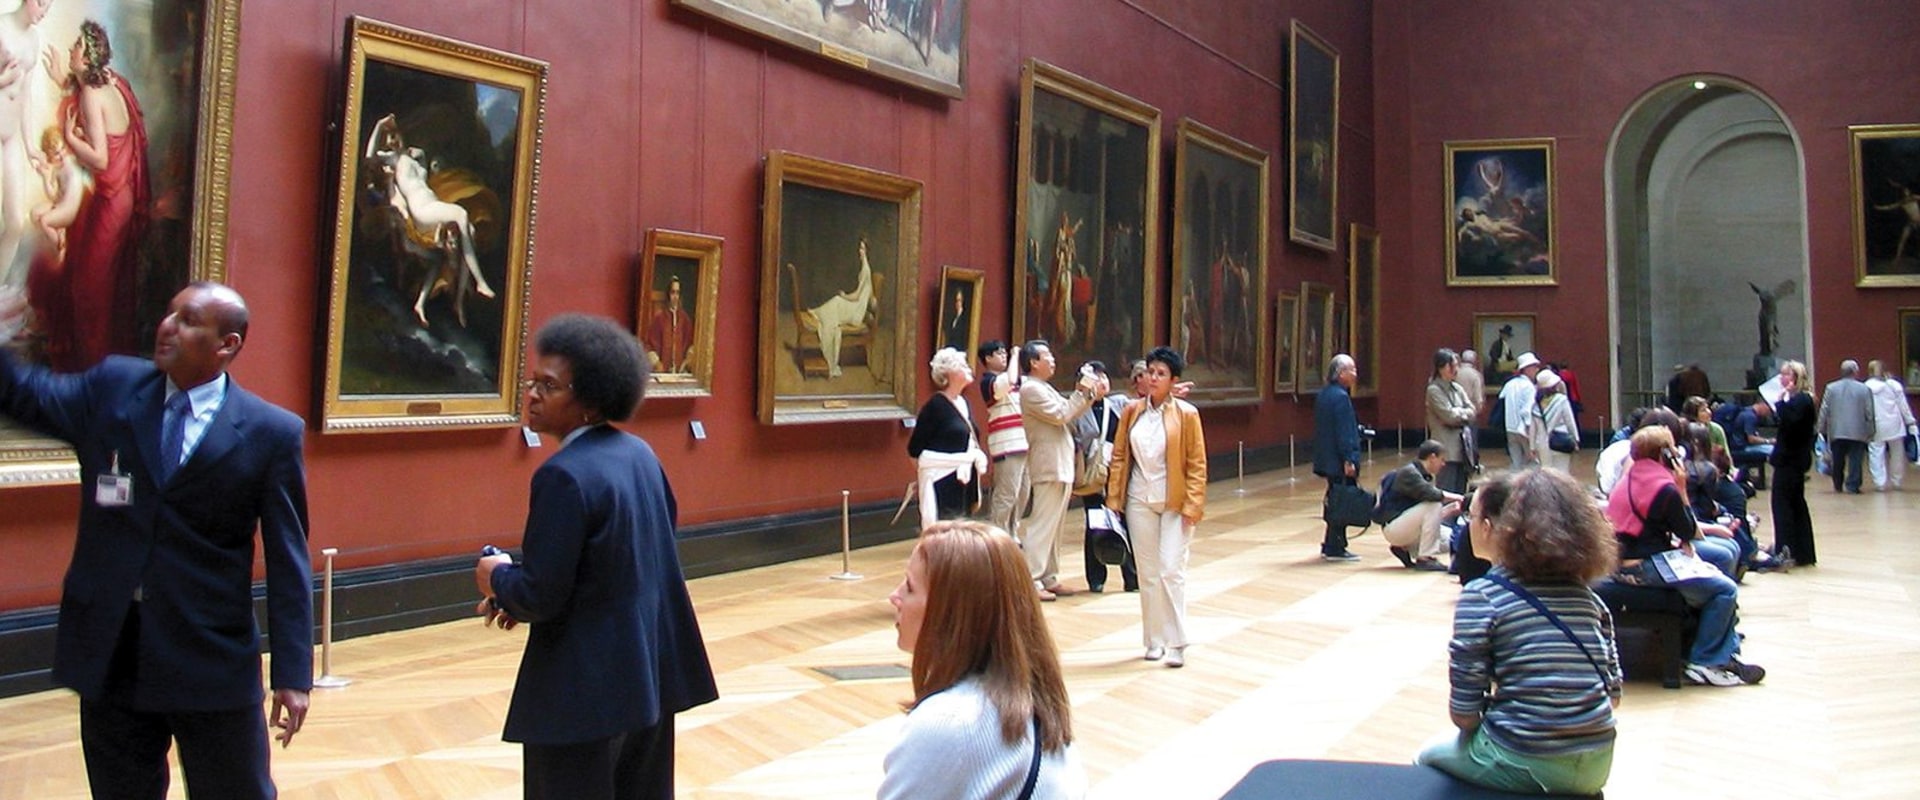 A Comprehensive Guide to the 4 Types of Museums